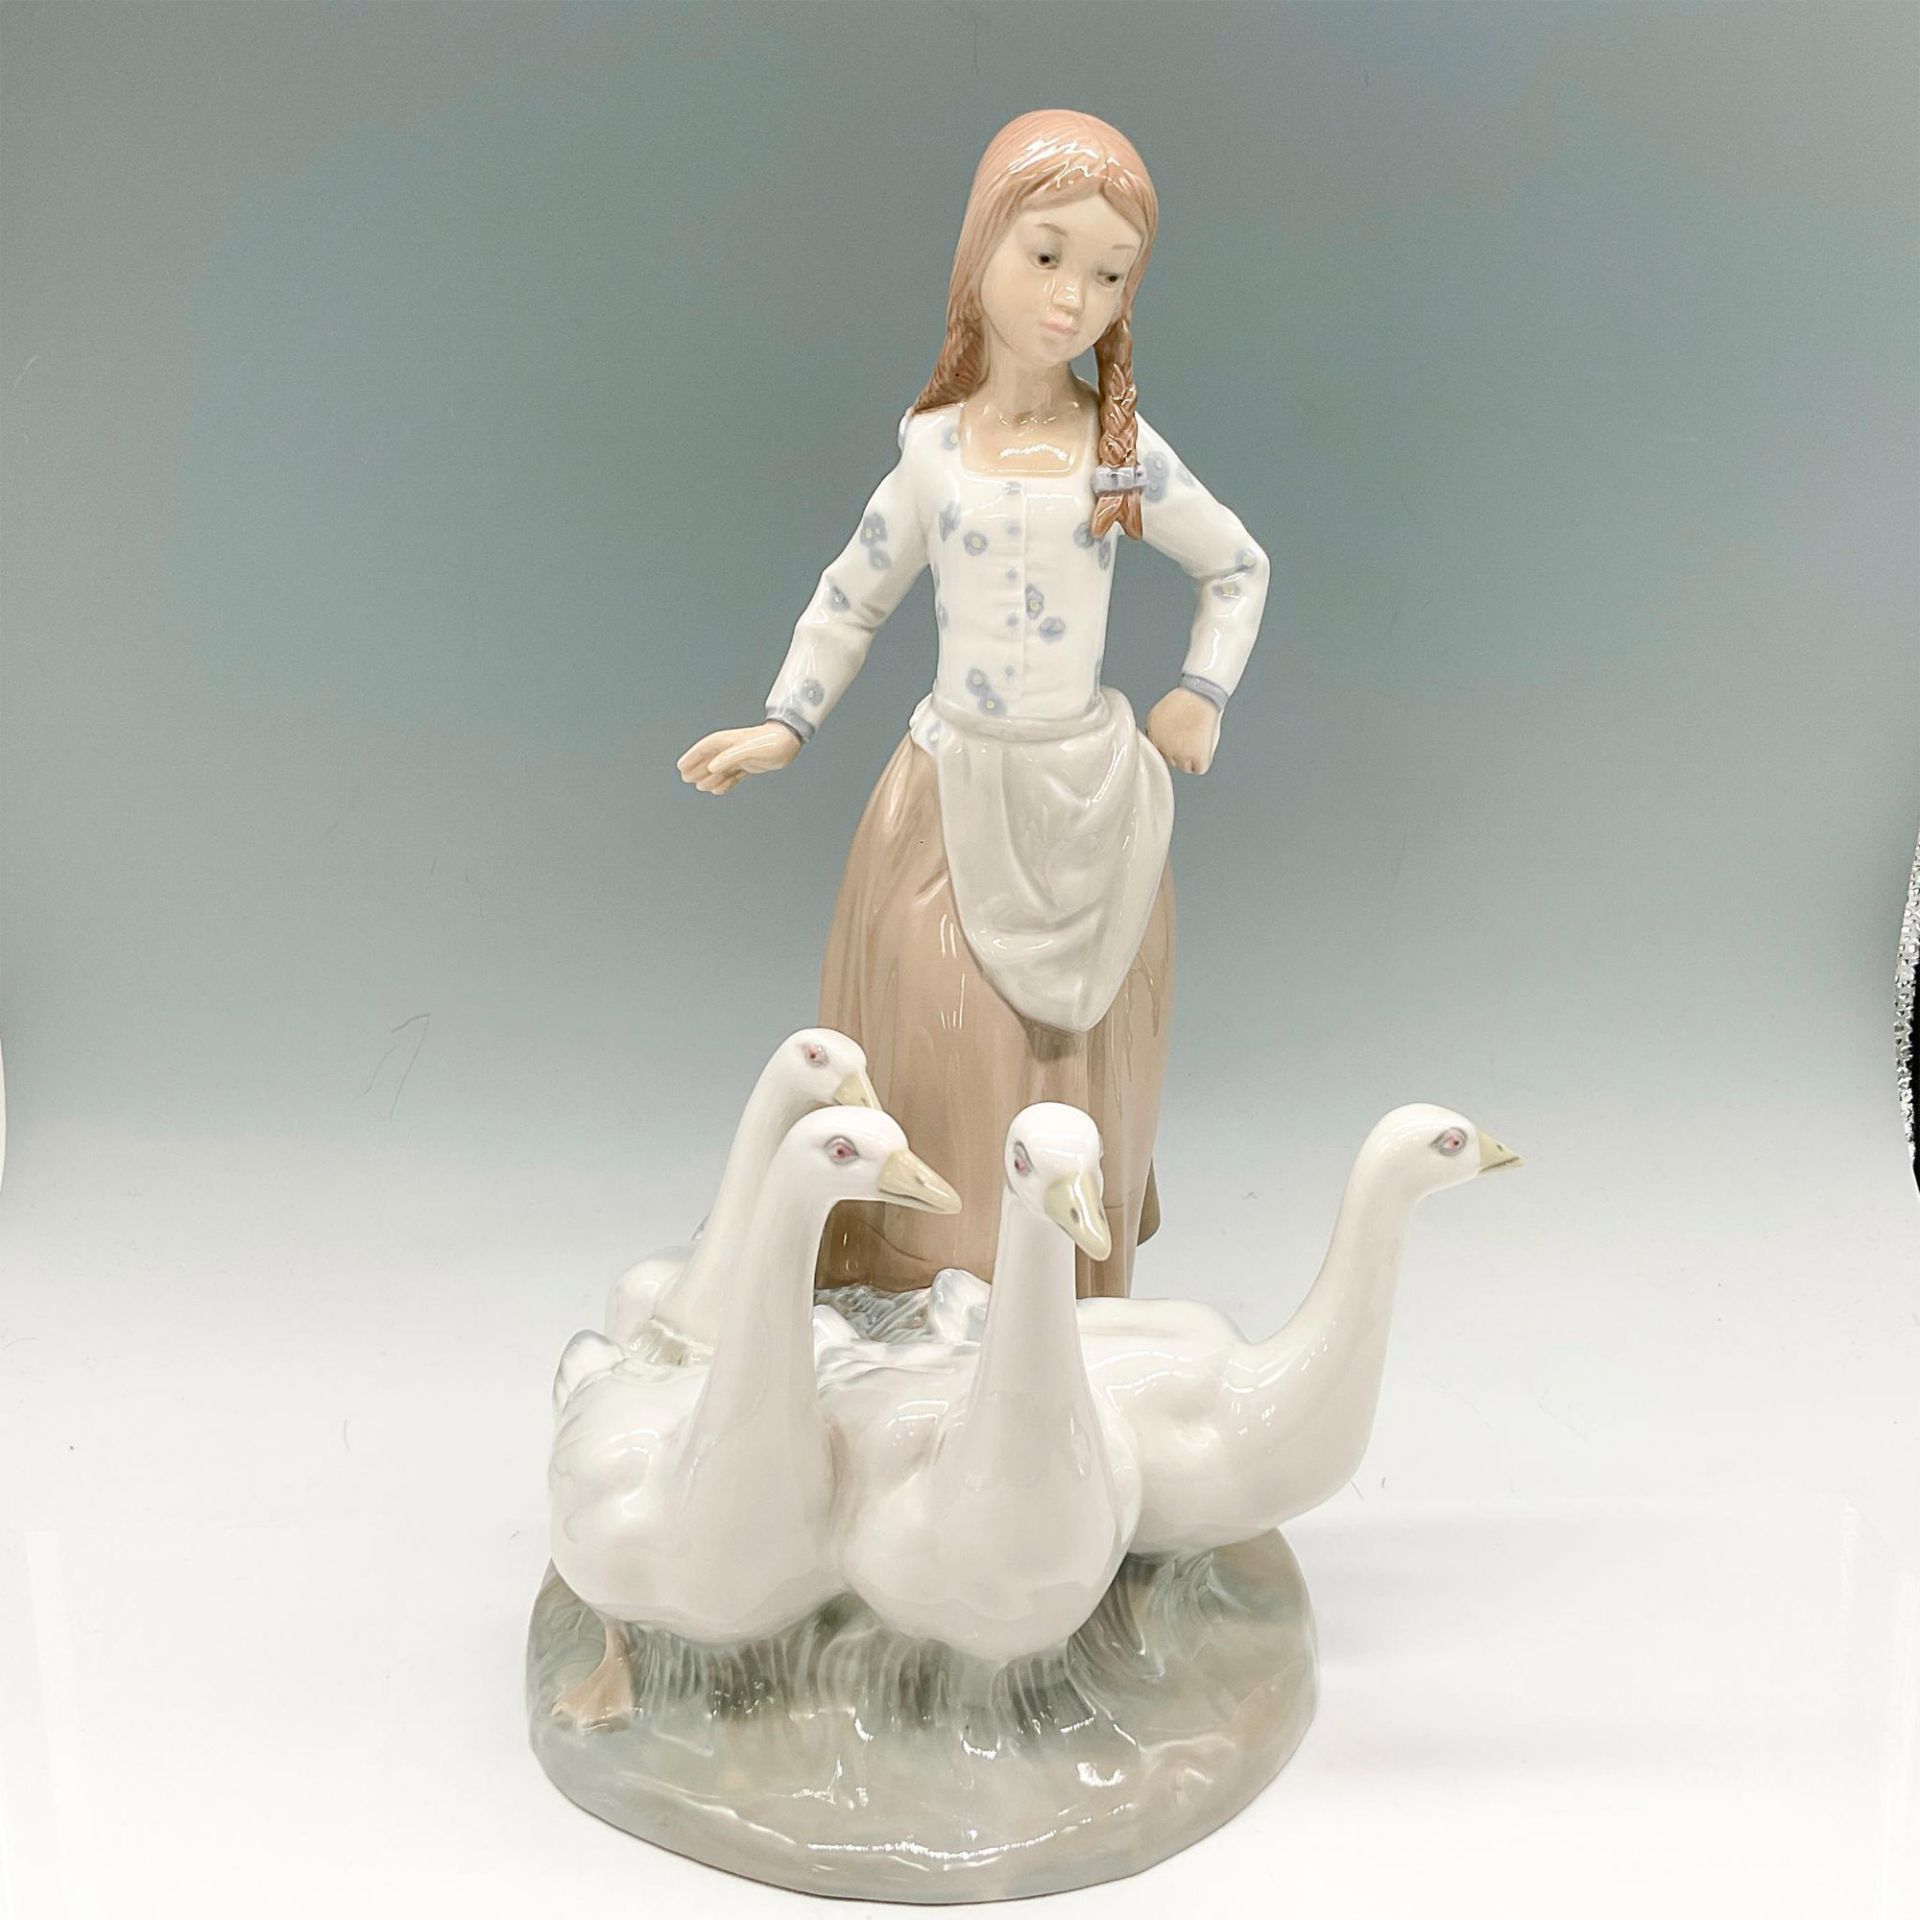 Zaphir Porcelain Figurine, Girl with Geese